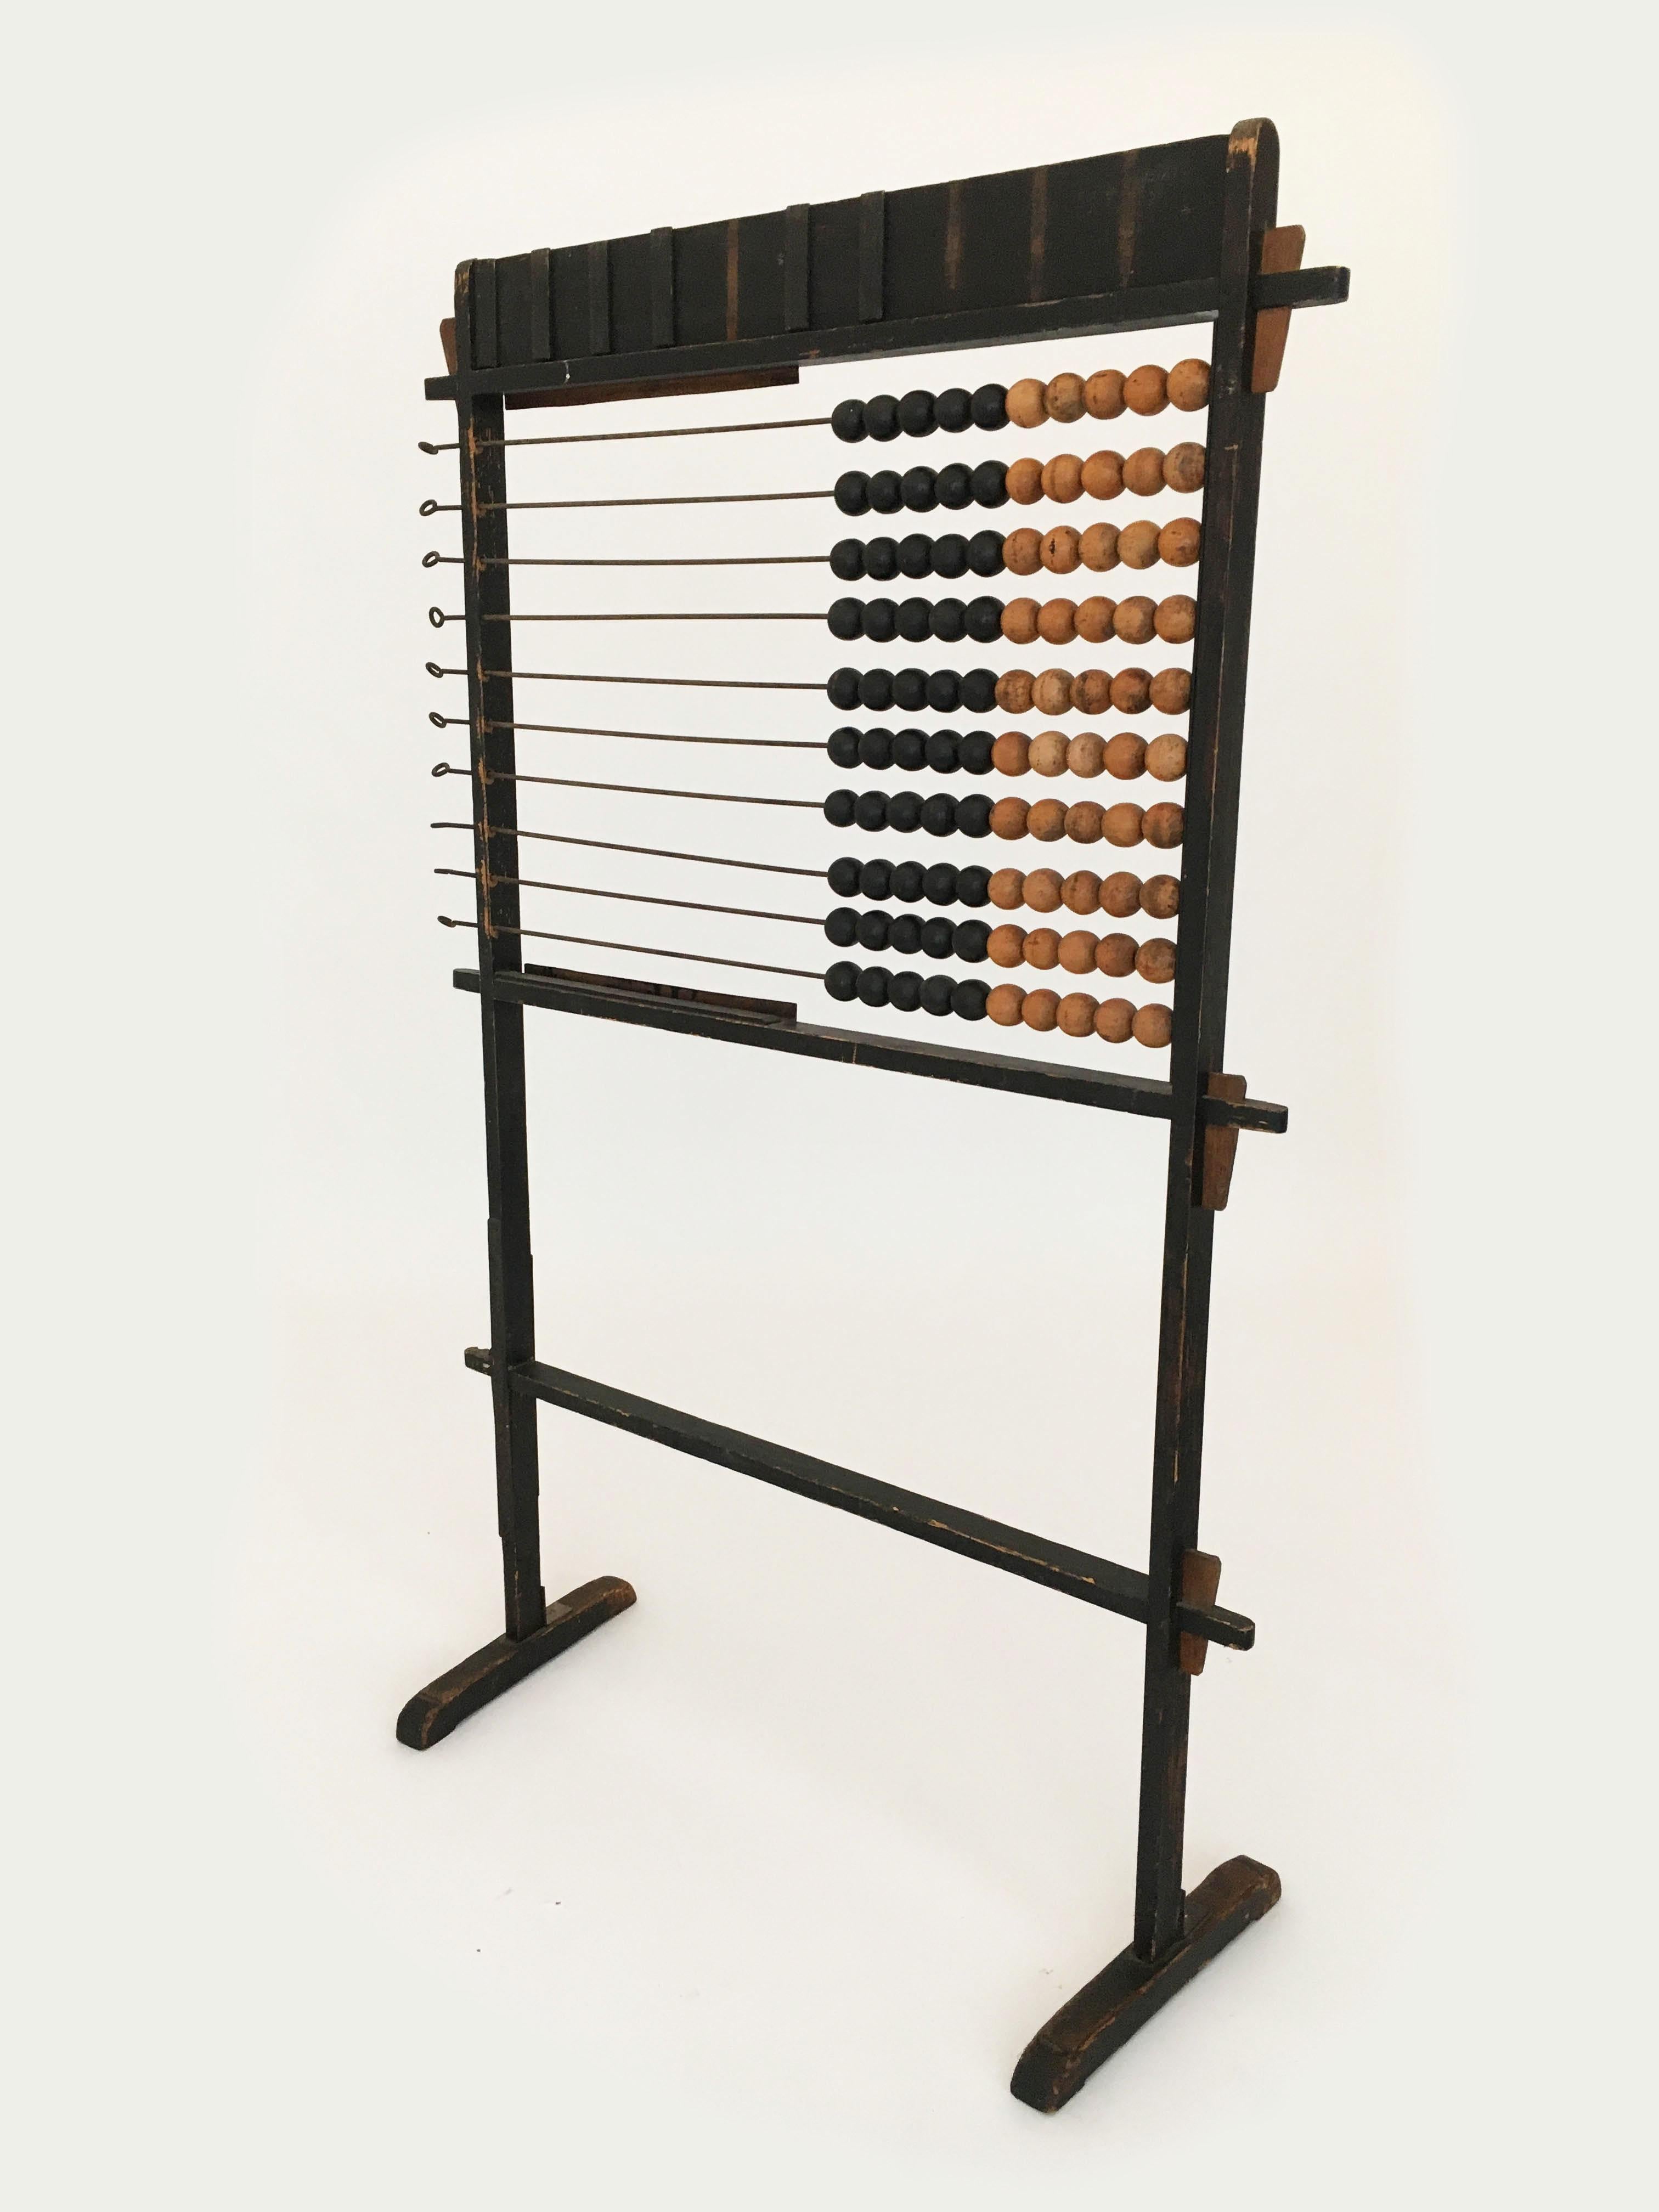 Other Form Follows Function Modern Abstract Abacus Obsolete Object, France, 1920s For Sale